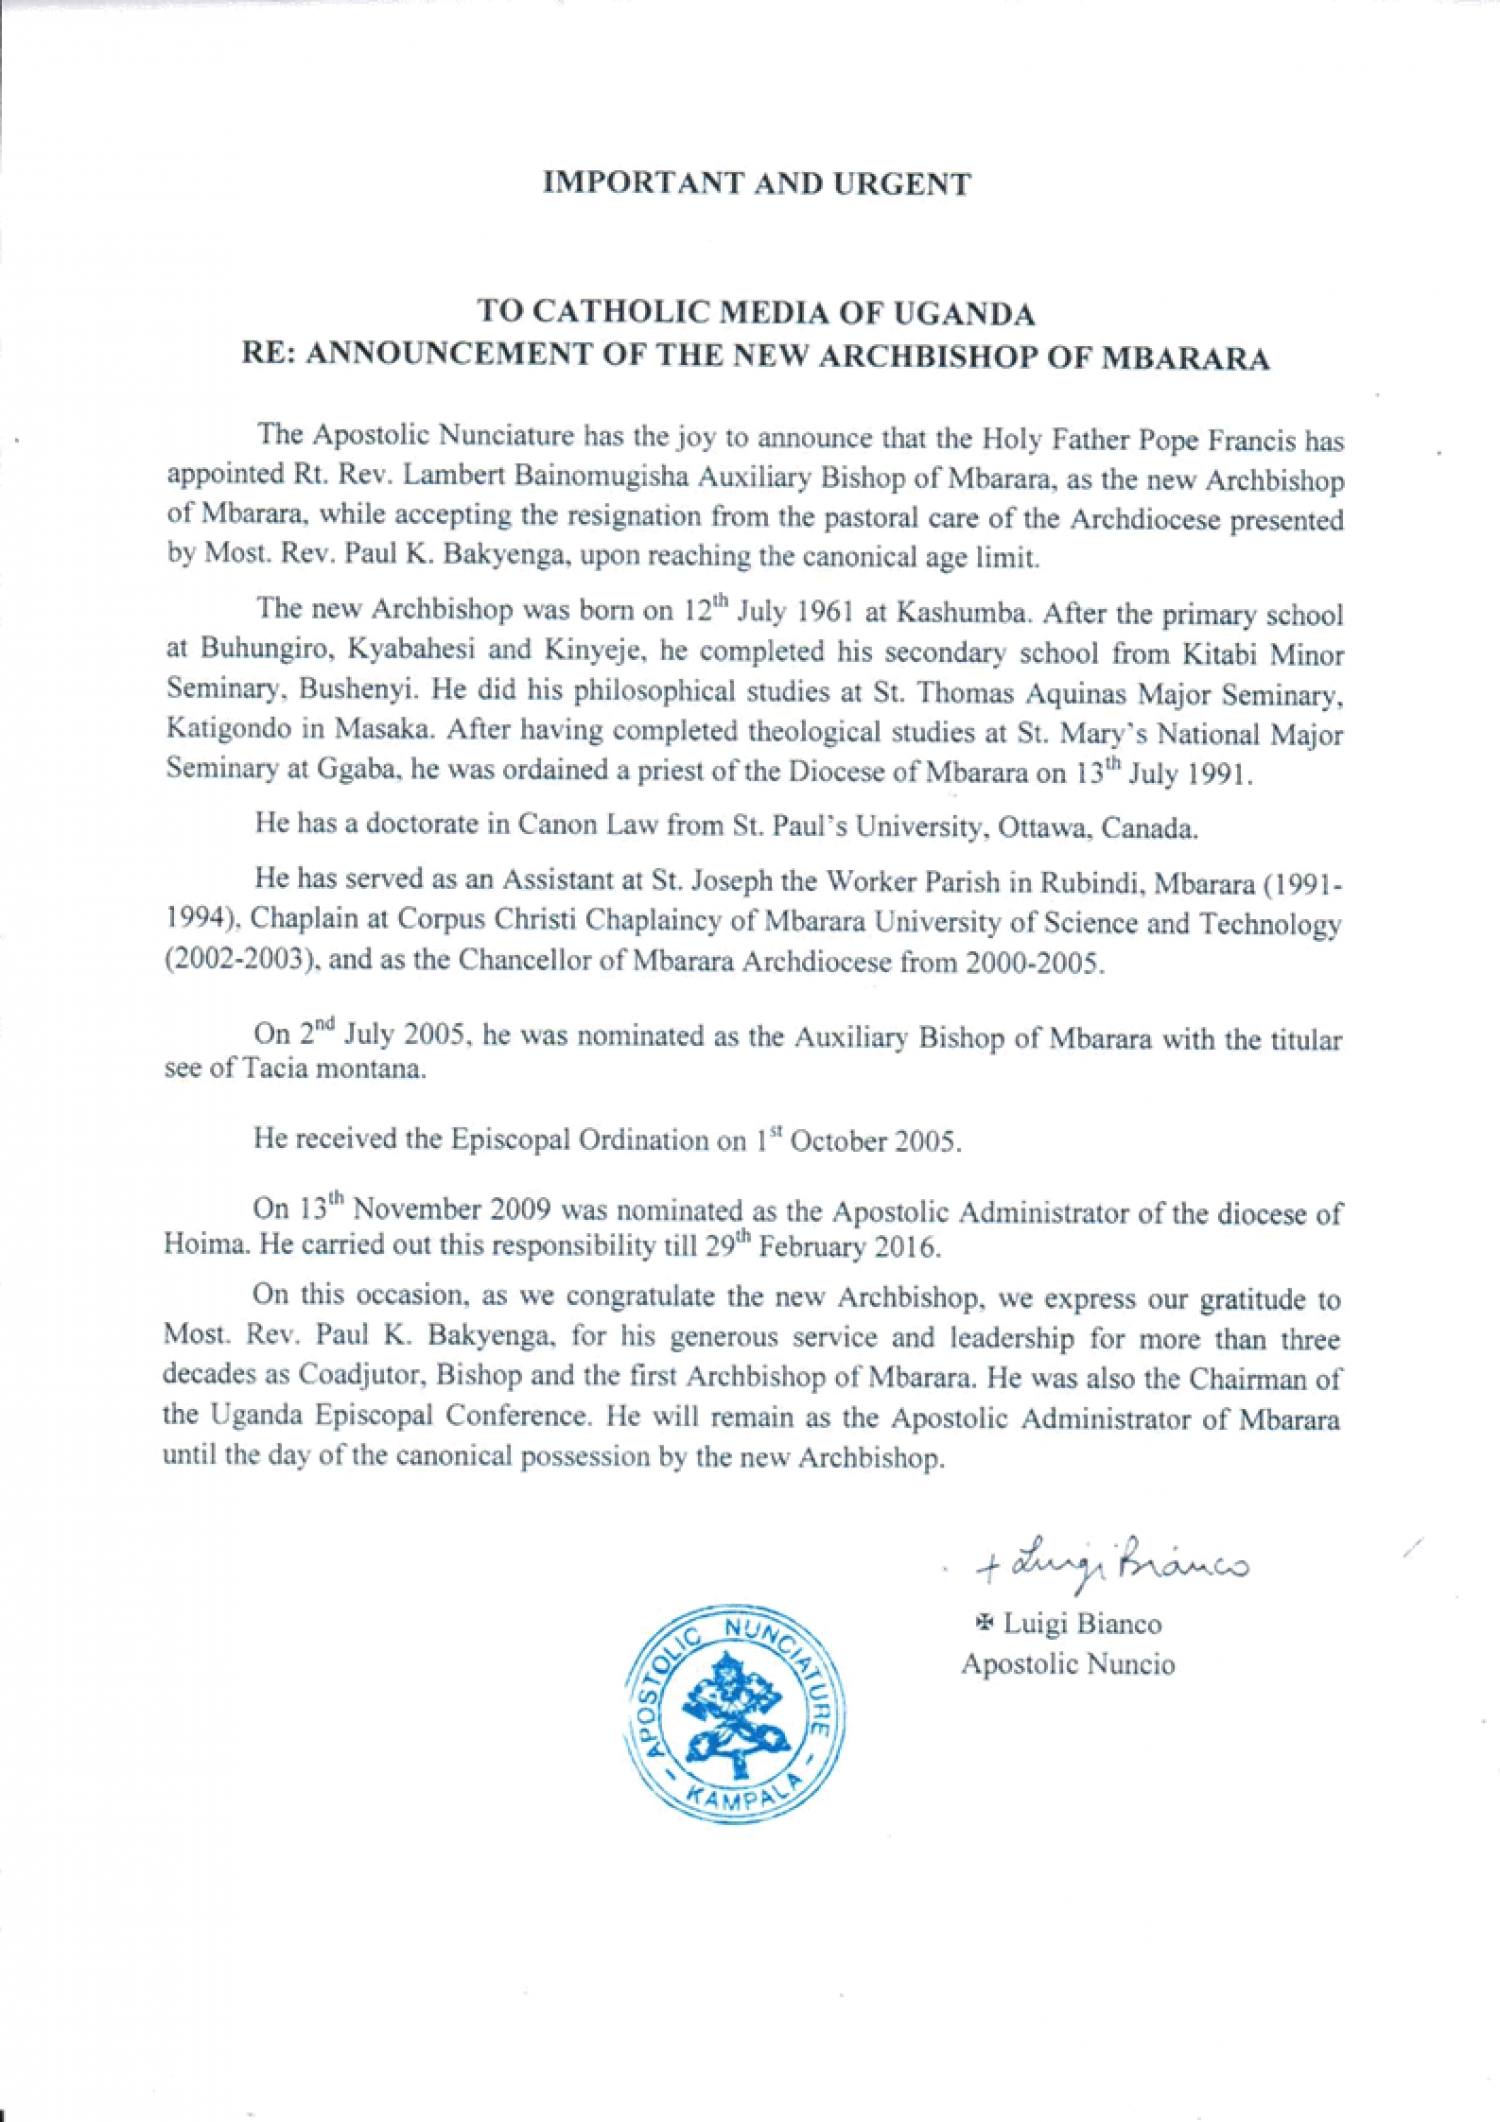 RE: ANNOUNCEMENT OF THE NEW ARCHBISHOP OF MBARARA